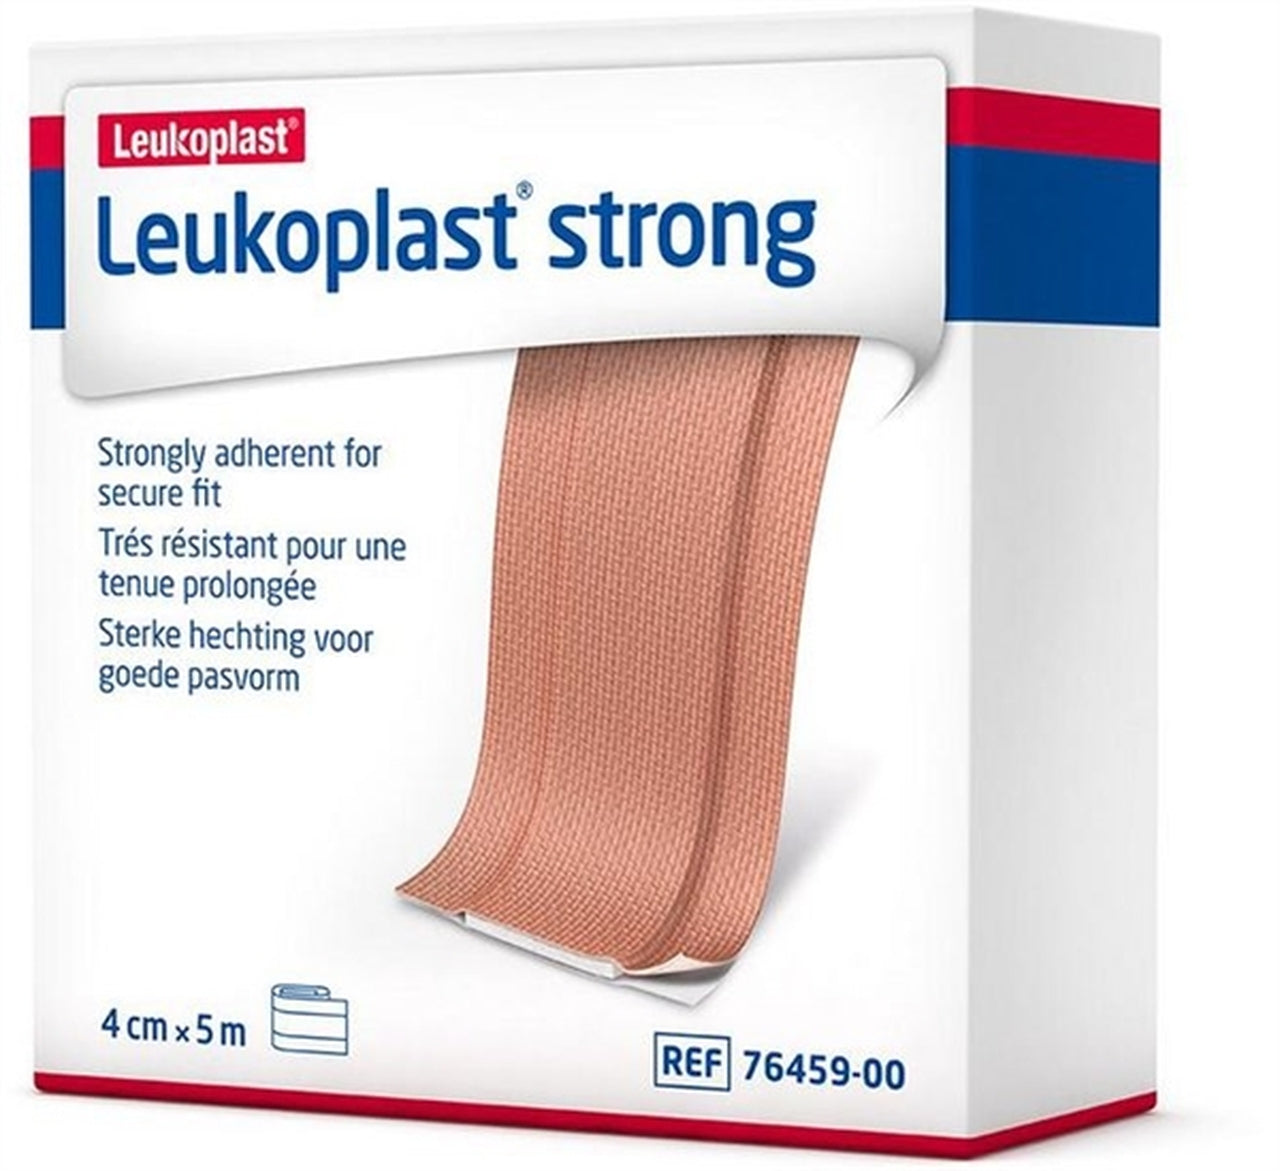 1 Leukoplast Strong Adhesive Doctor's Set (Assorted Sizes) - Box Of 101